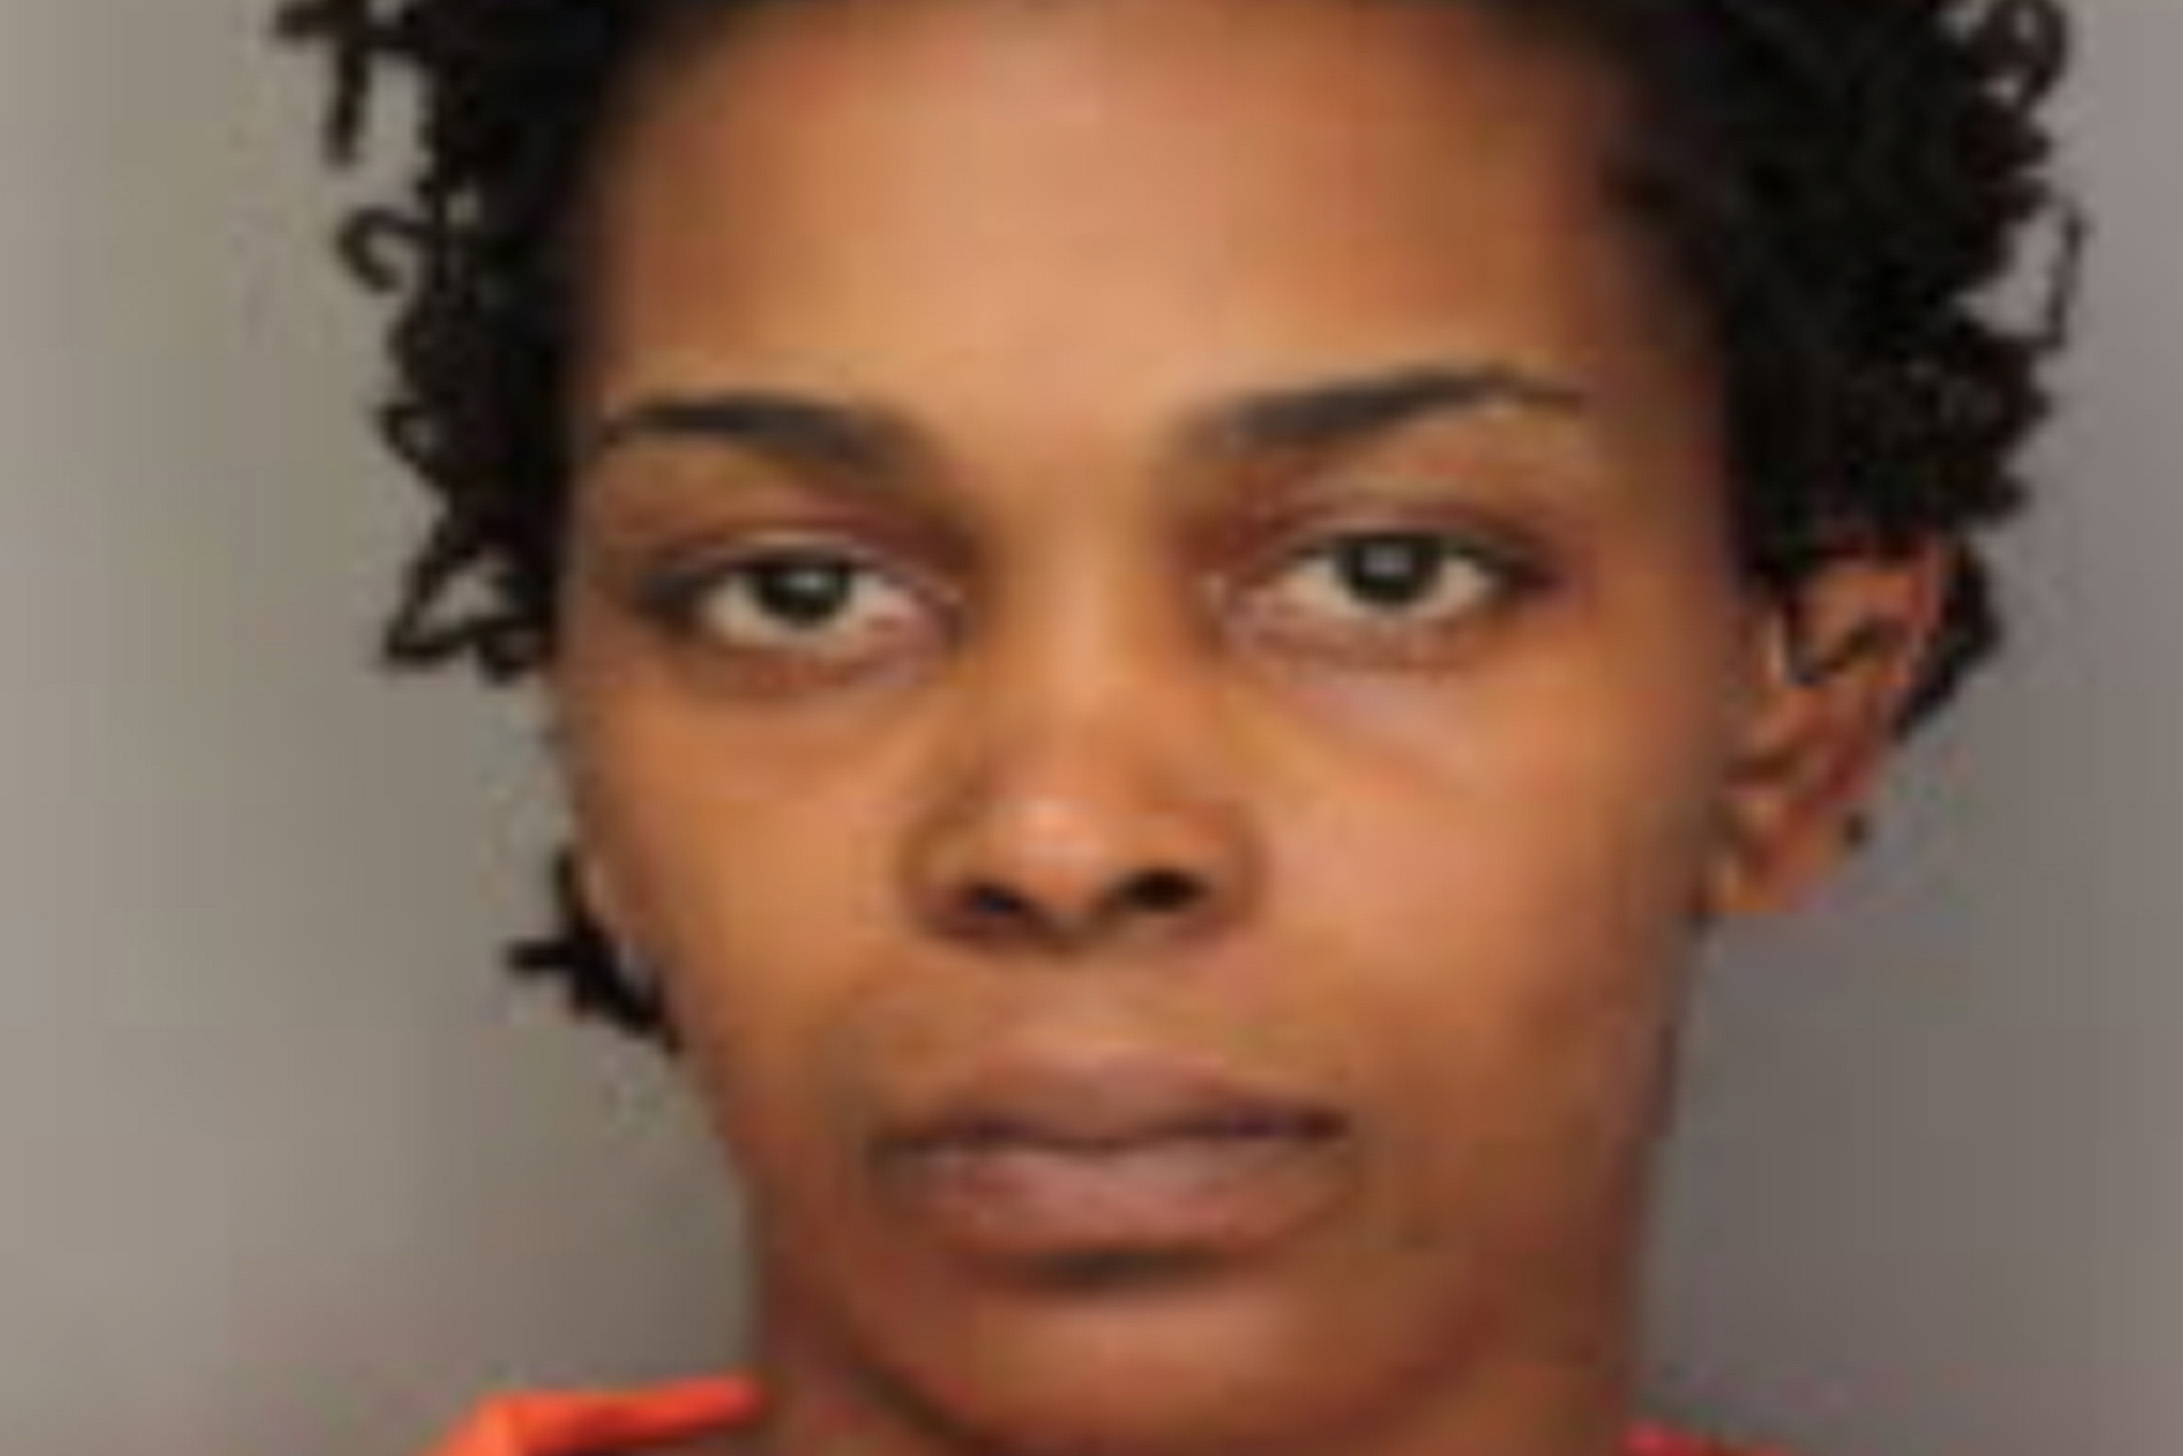 This 2016 arrest photo provided by the Shelby County Sheriff's Office shows Shanynthia Gardner of Memphis, Tenn.